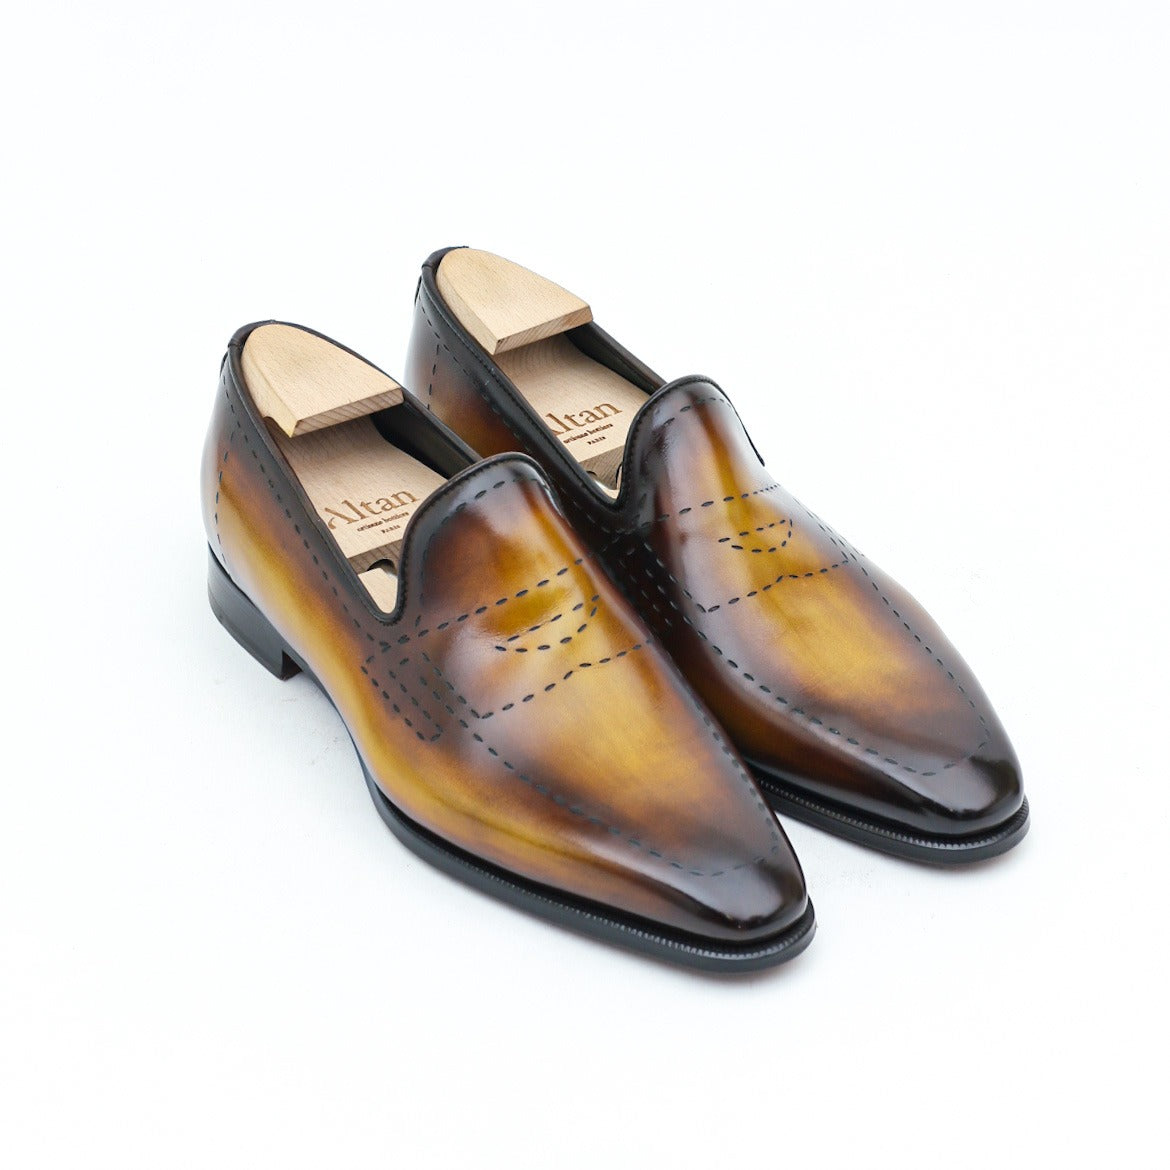 Wholecut Loafer and laser pattern